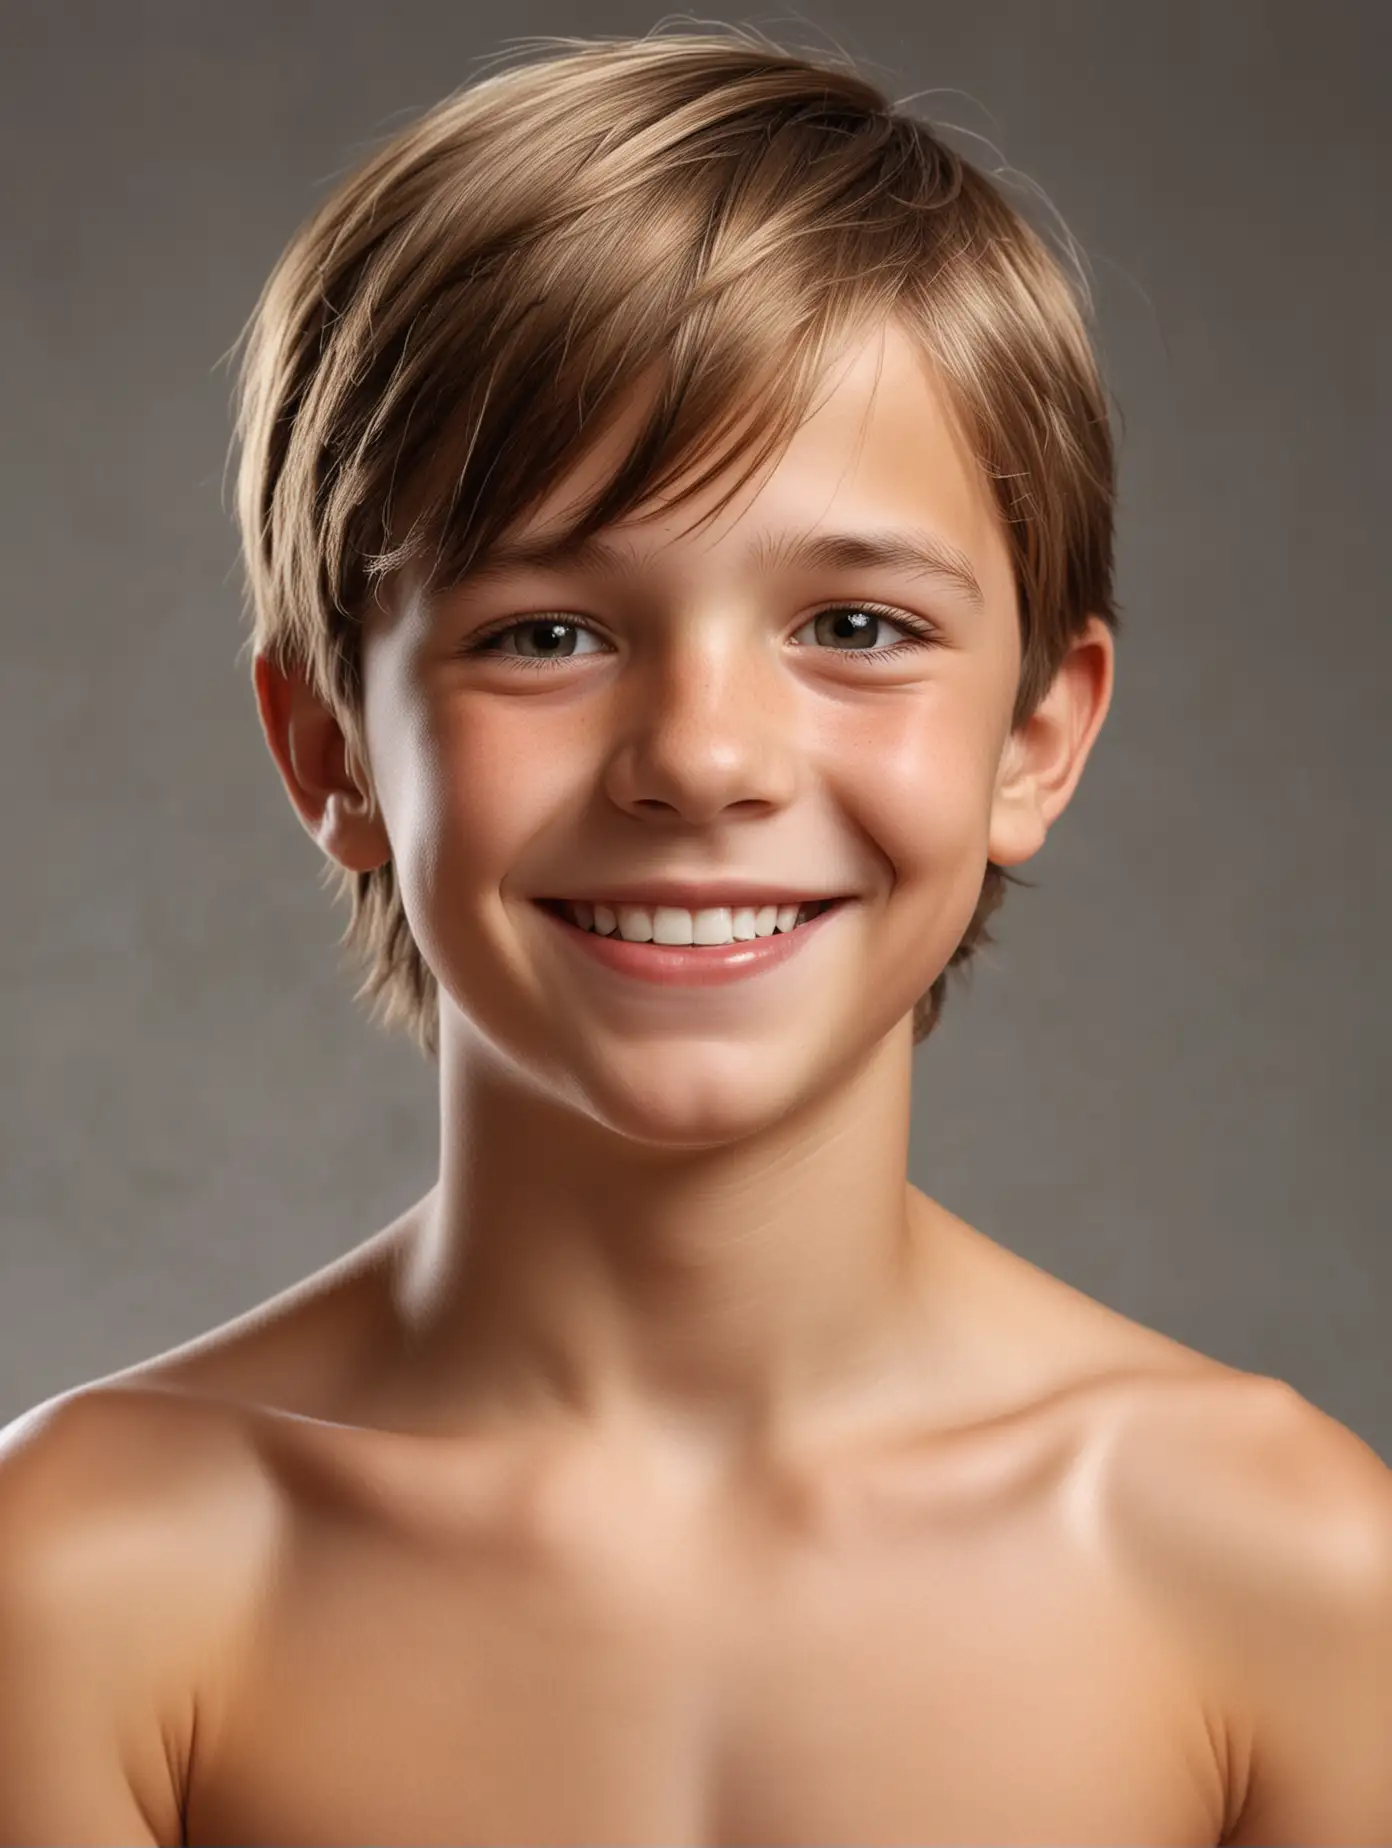 Back view, Hyper realistic Portrait quality photo of shinny thirteen year old boy, smiling, soft shiny straight collar length hair,   shirtless,  from waist up